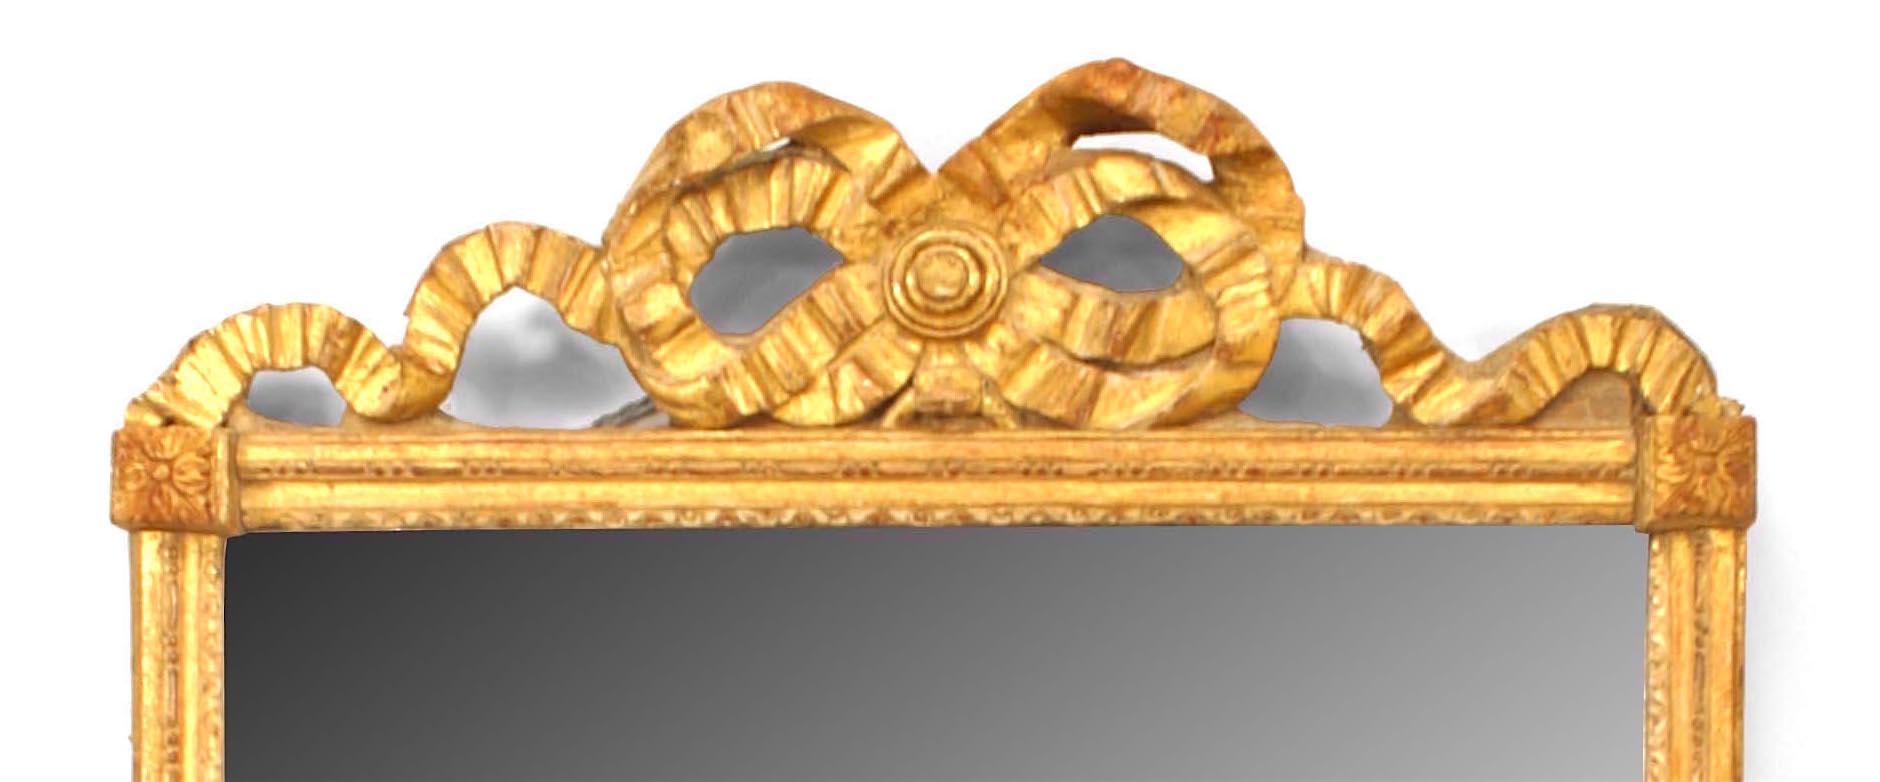 French Louis XVI-style (19th Century) giltwood wall mirror with carved filigree ribbon bow knot design pediment with original glass and raised block corners with rosette details.
